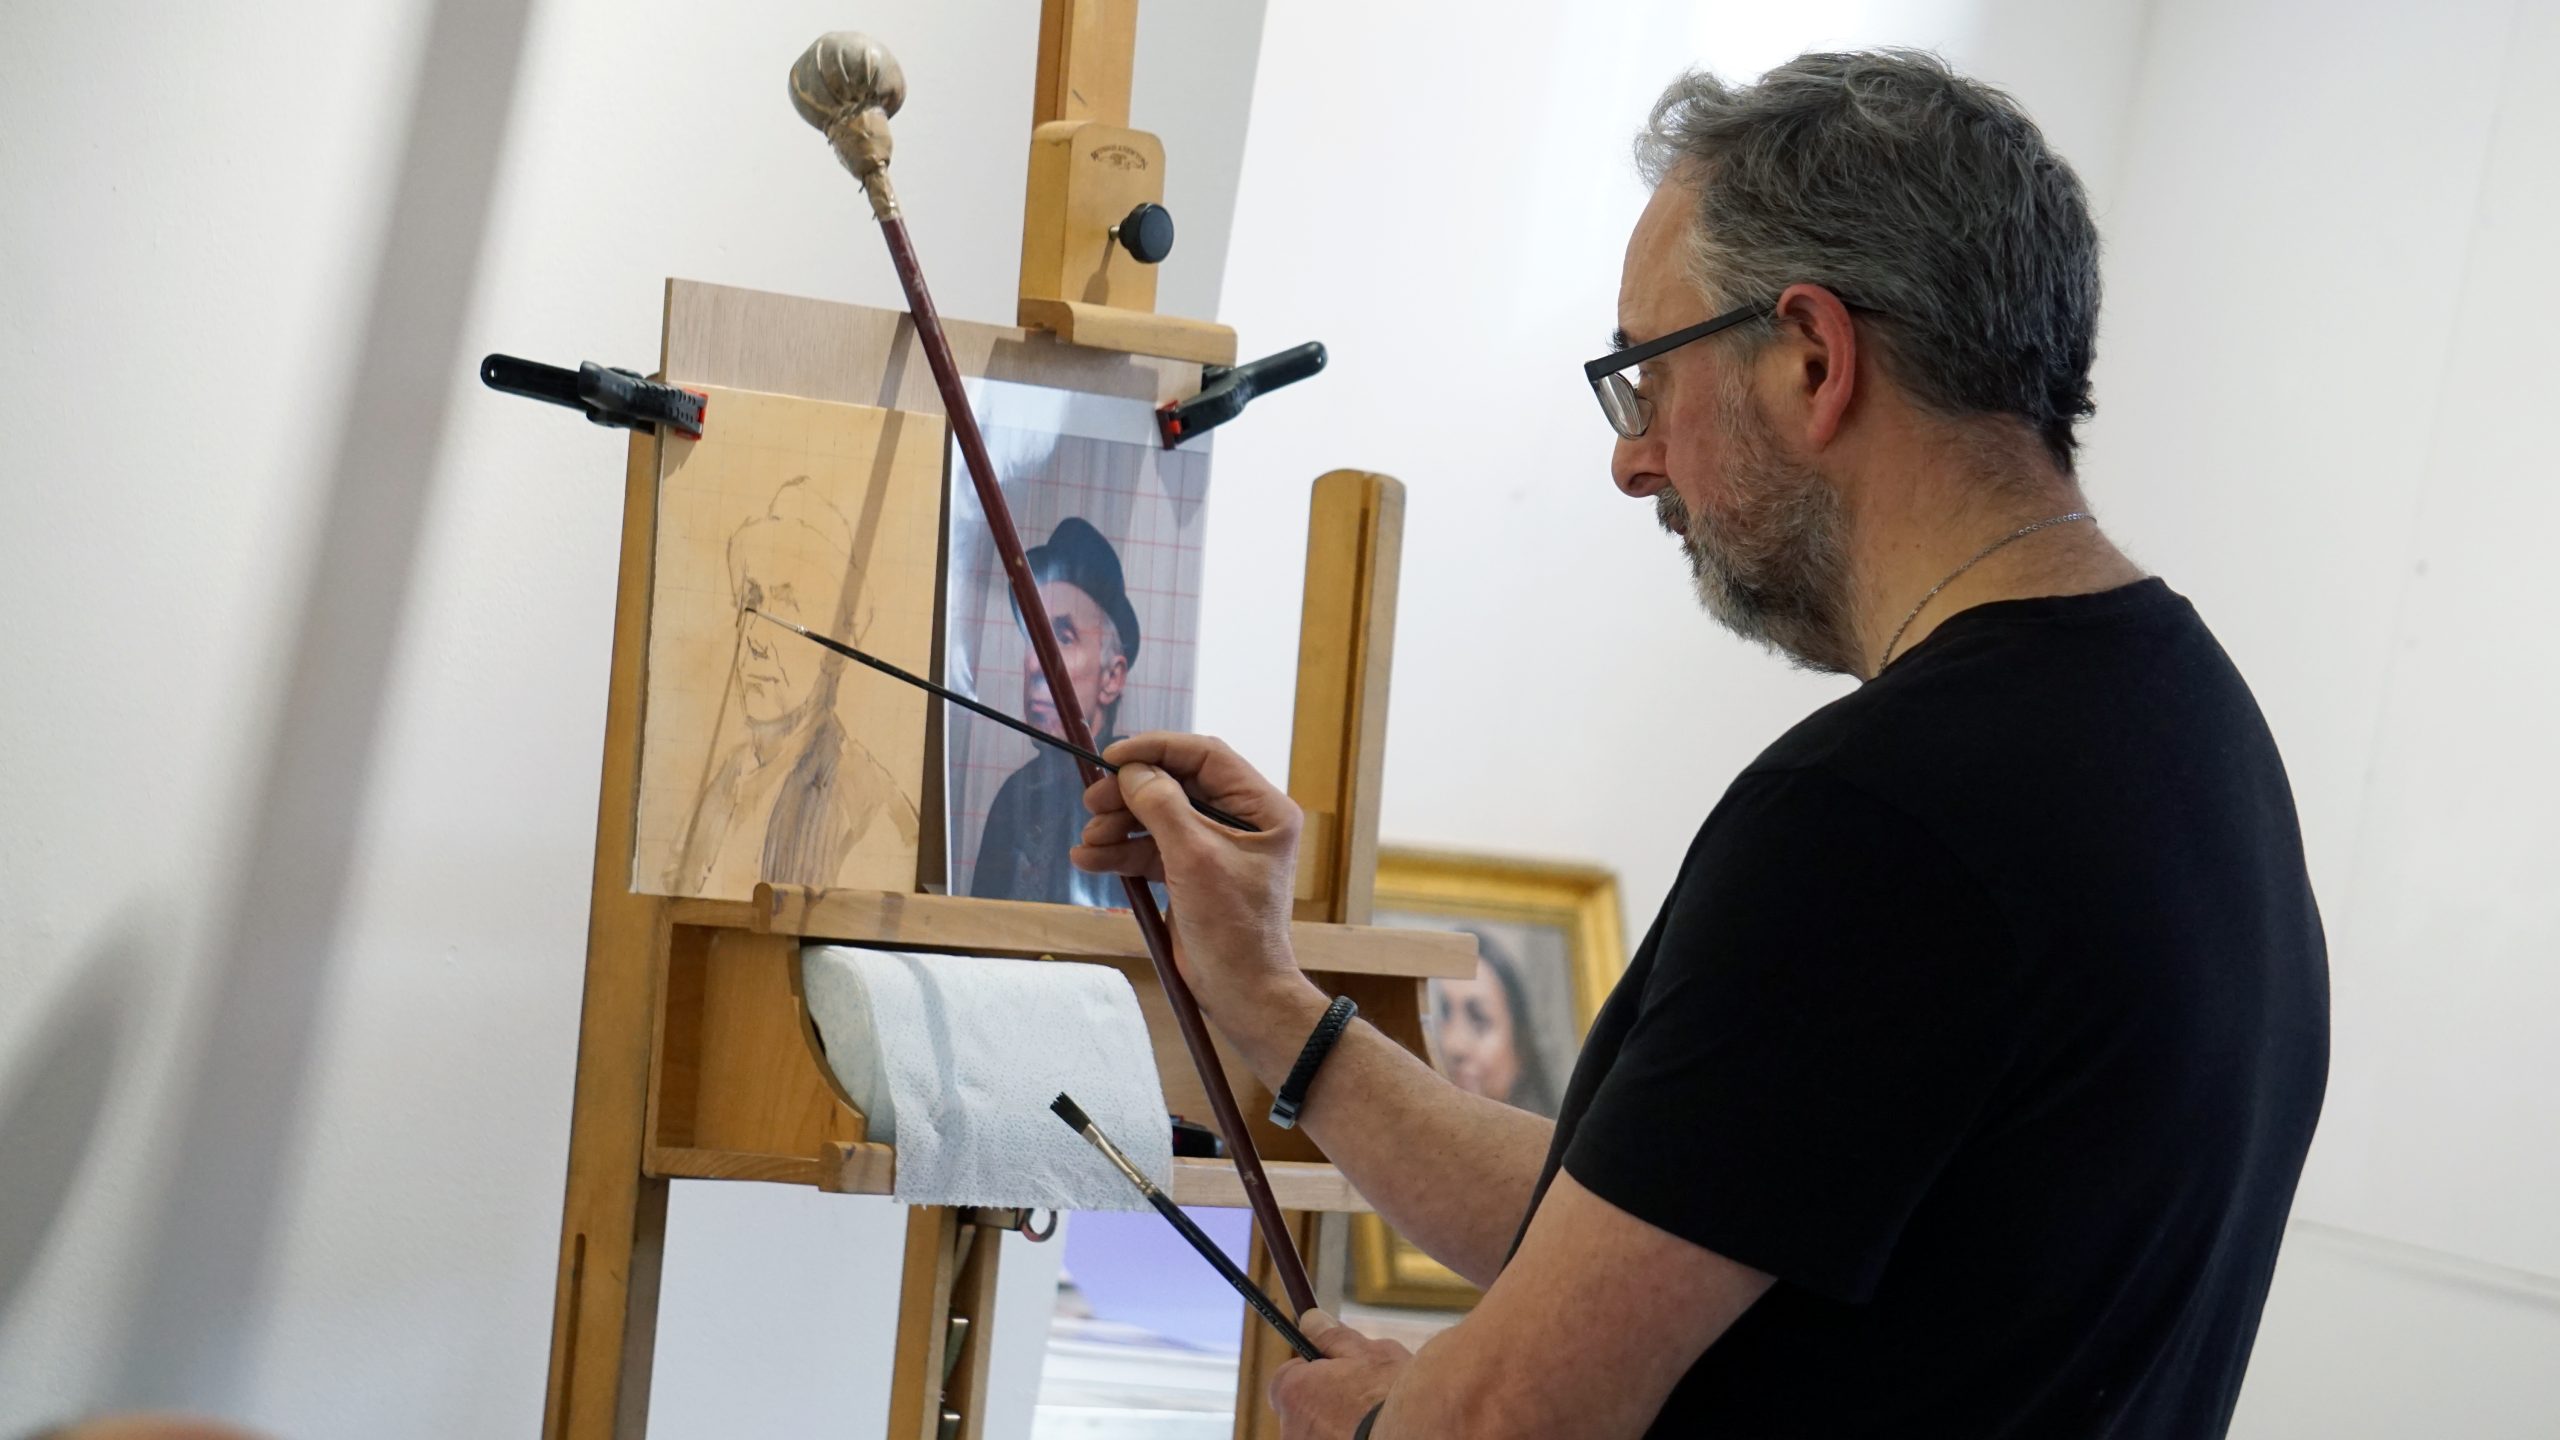 Introduction to Painting Portraits in Oils with Martyn Harris ARBSA, February 2023